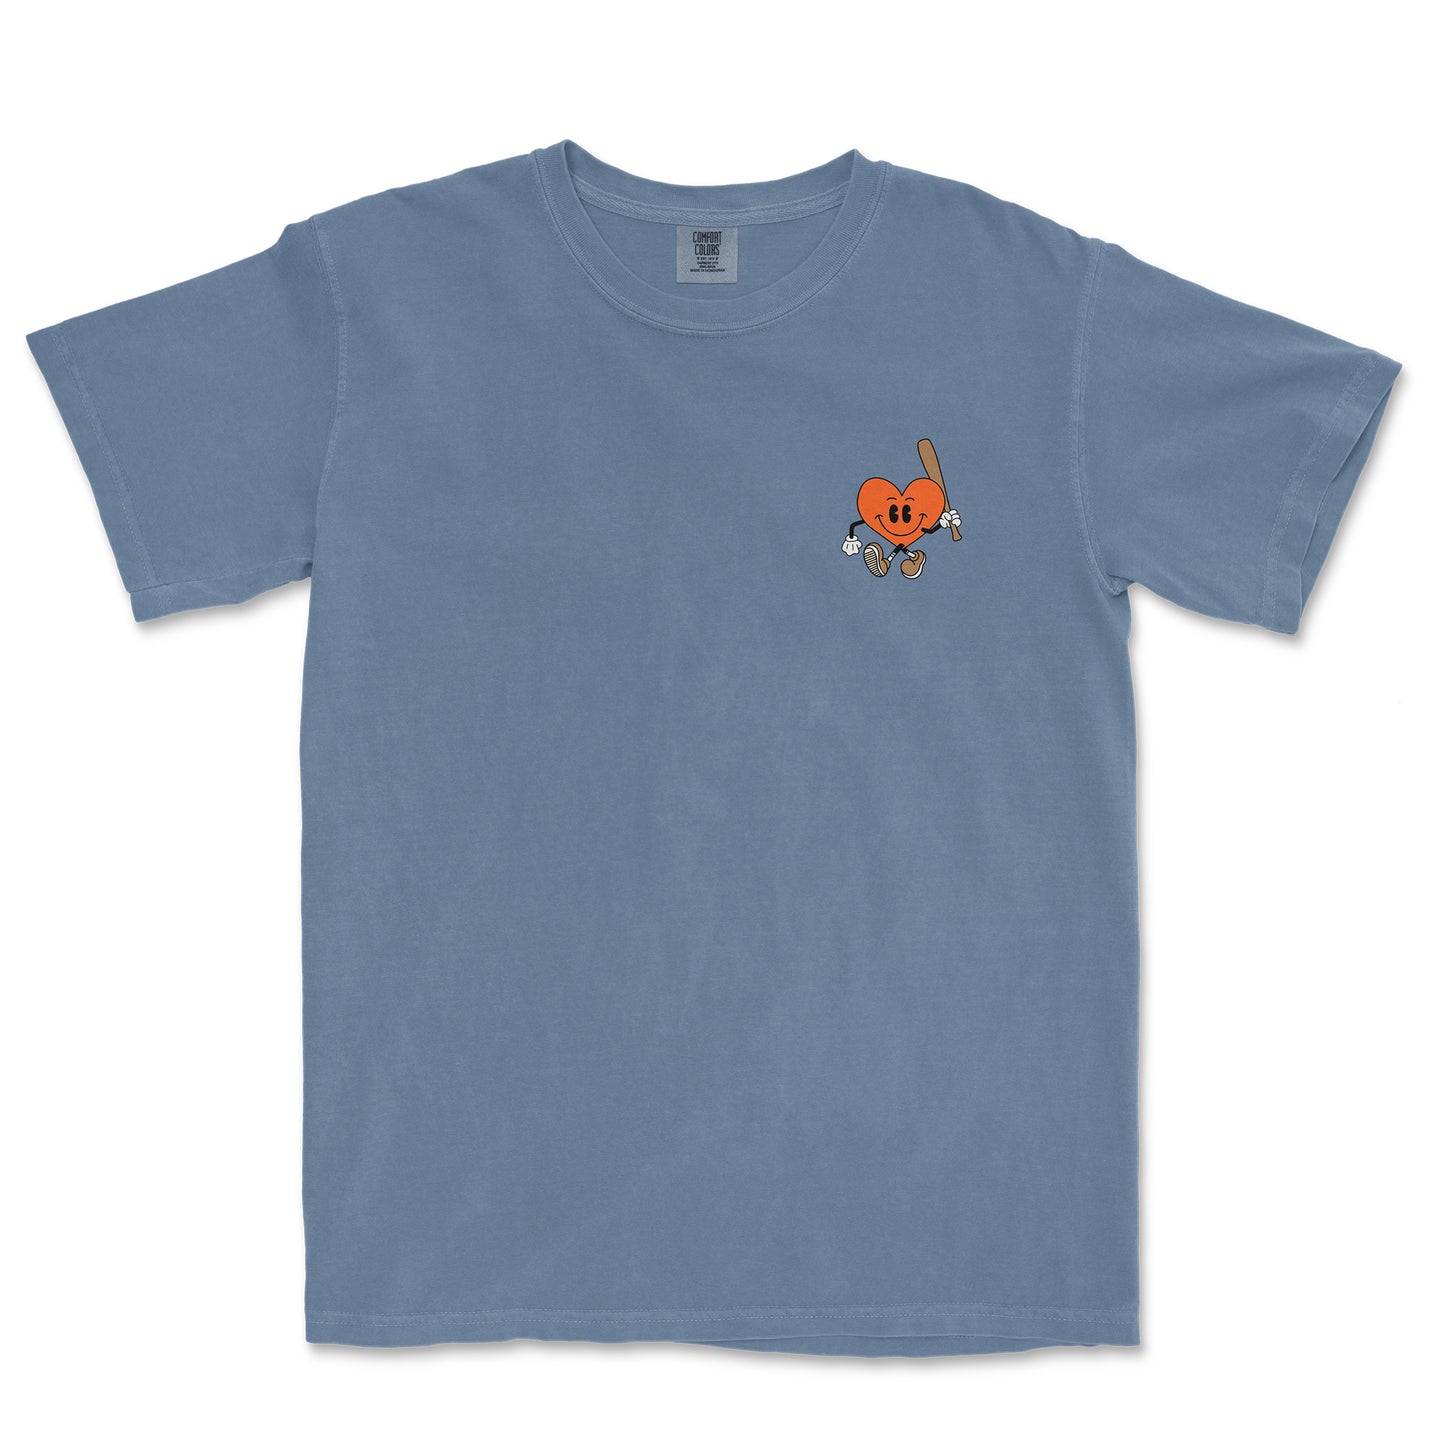 NAME 5 PLAYERS | COMFORT COLORS® VINTAGE TEE